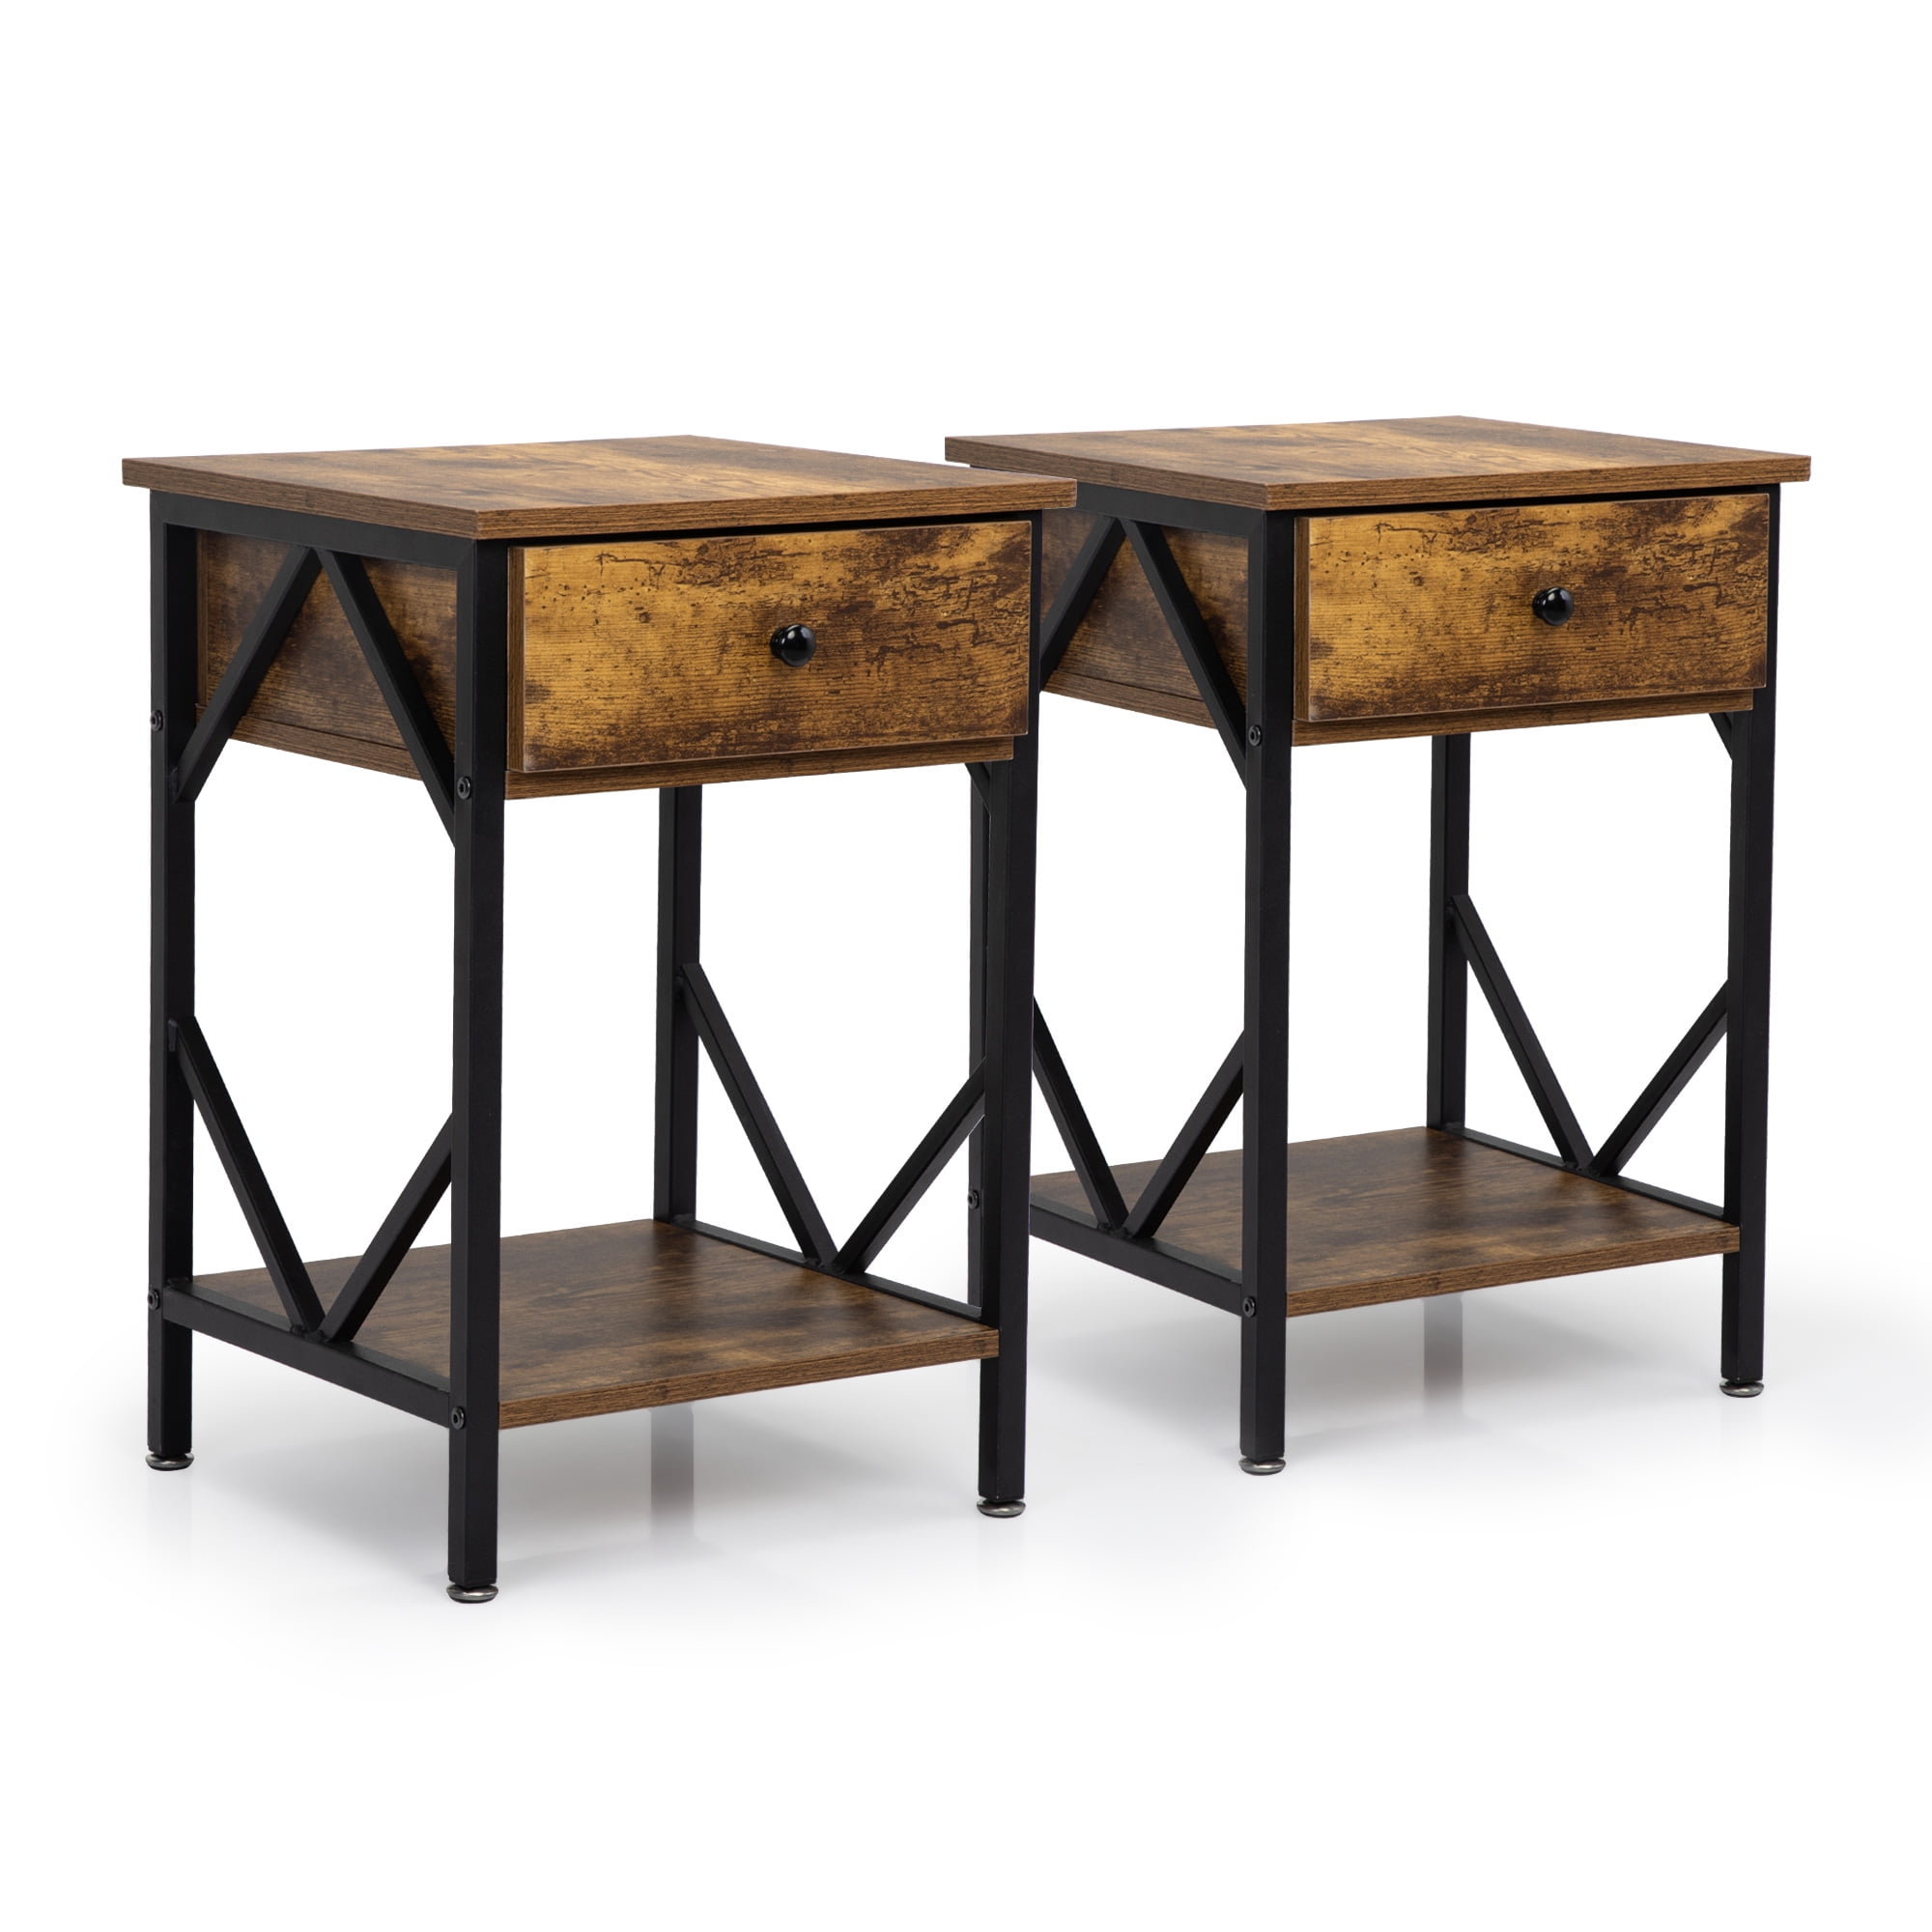 Rustic End Table Set of 2 with Drawer, Industrial Bedside Table Set of ...